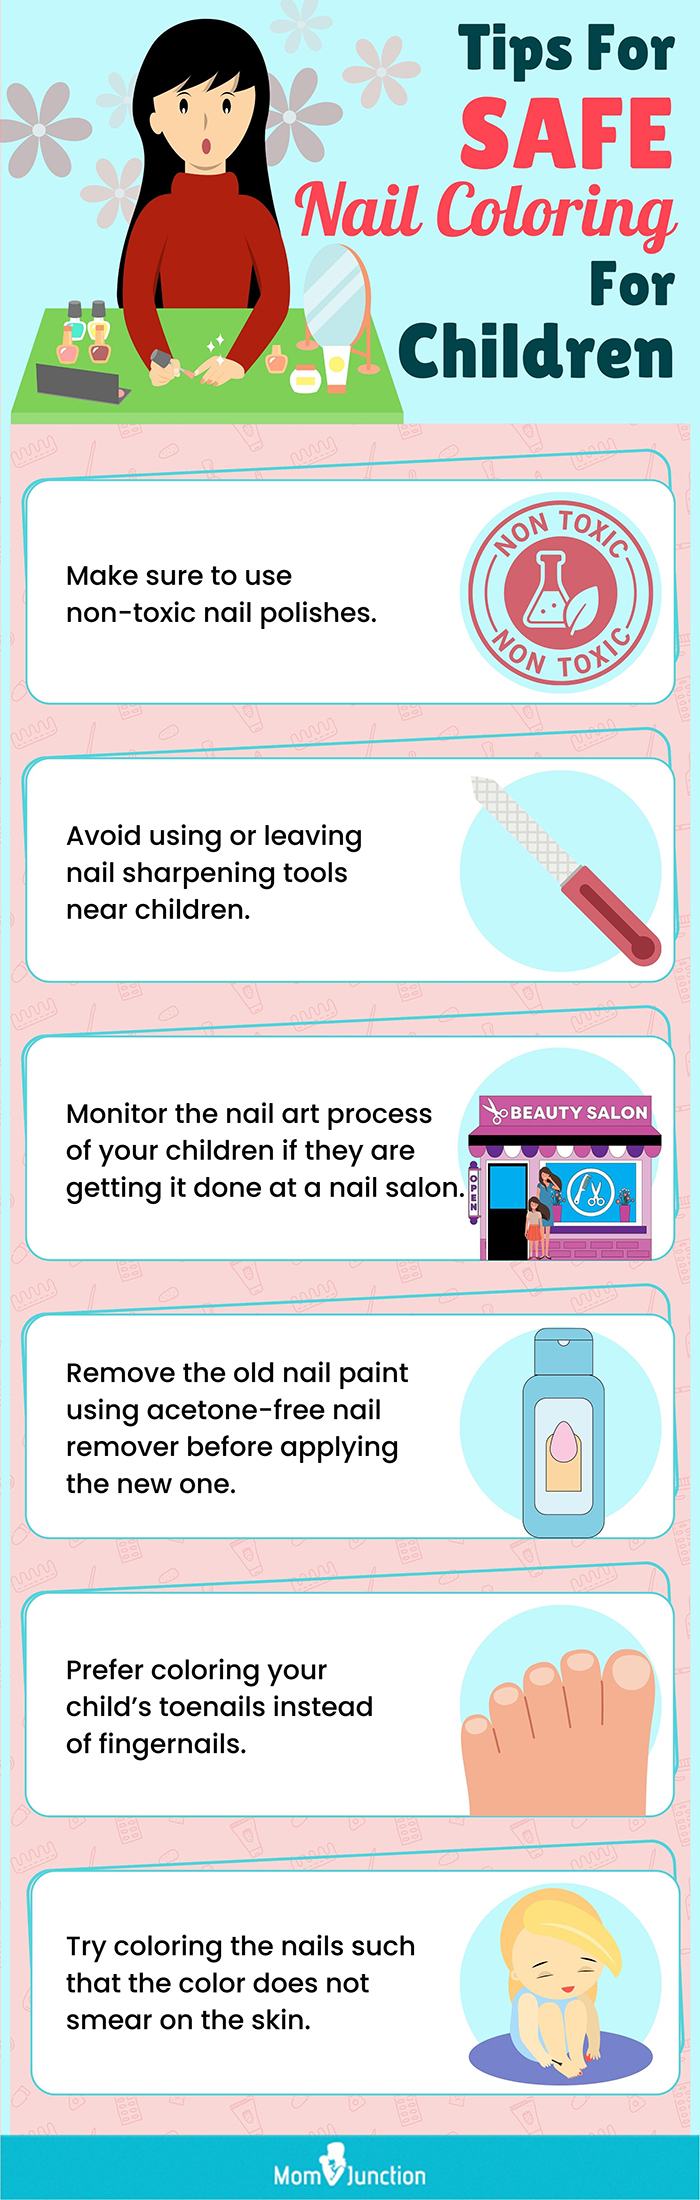 tips for safe nail coloring for children (infographic)